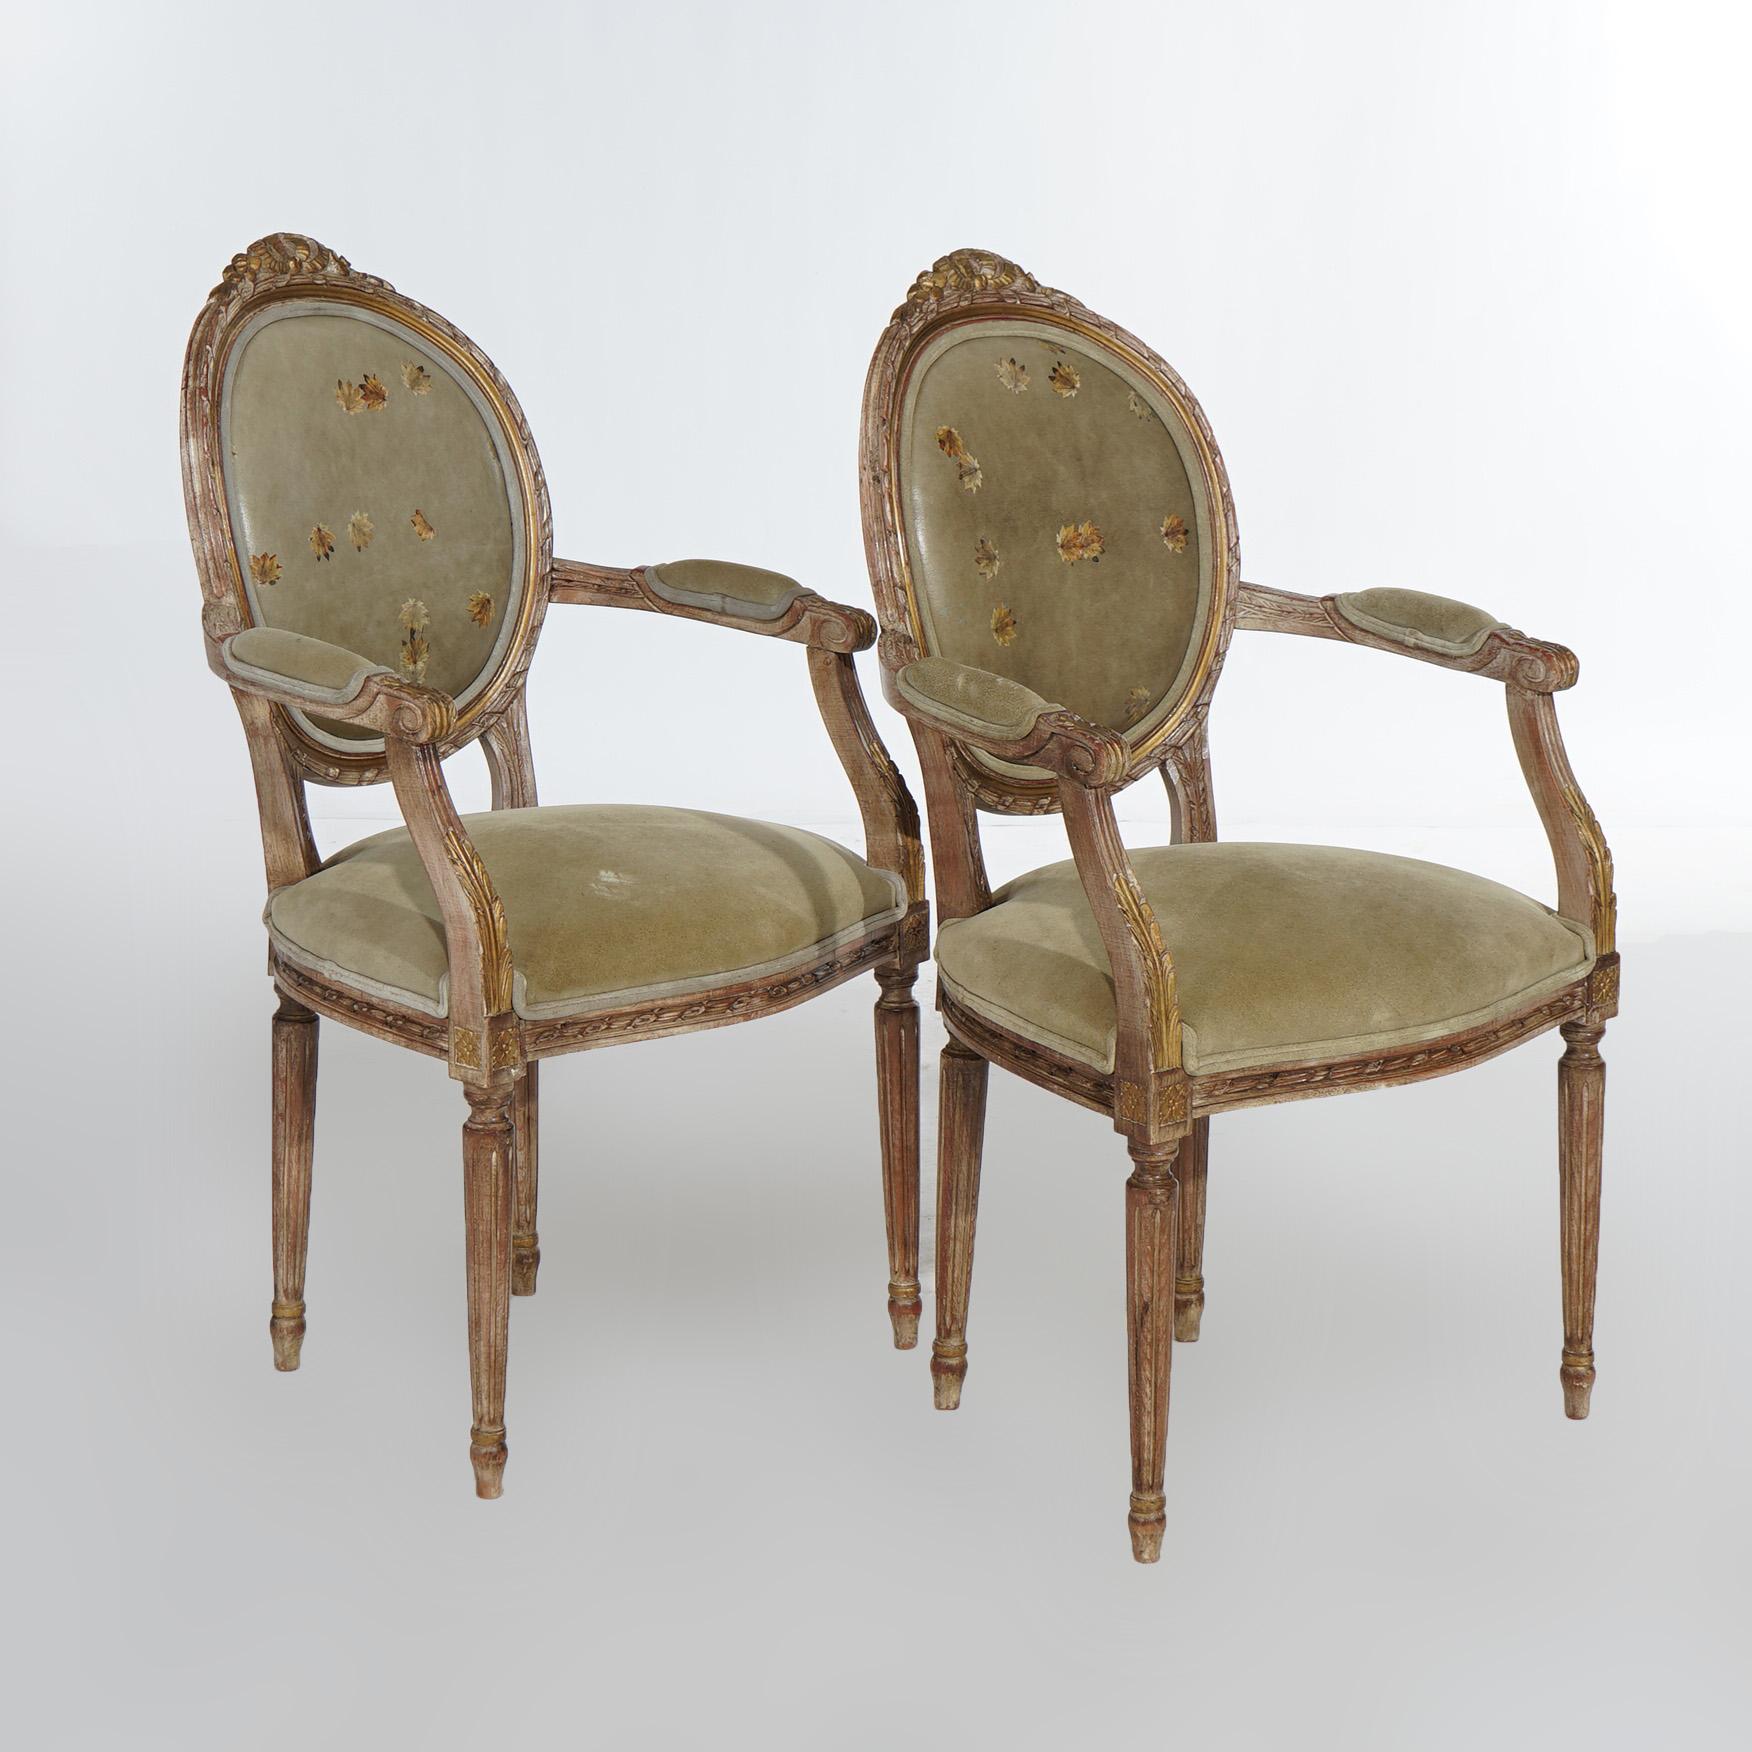 Antique Pair of Louis XVI Leather & Carved, Polychromed Giltwood Armchairs 20thC For Sale 2